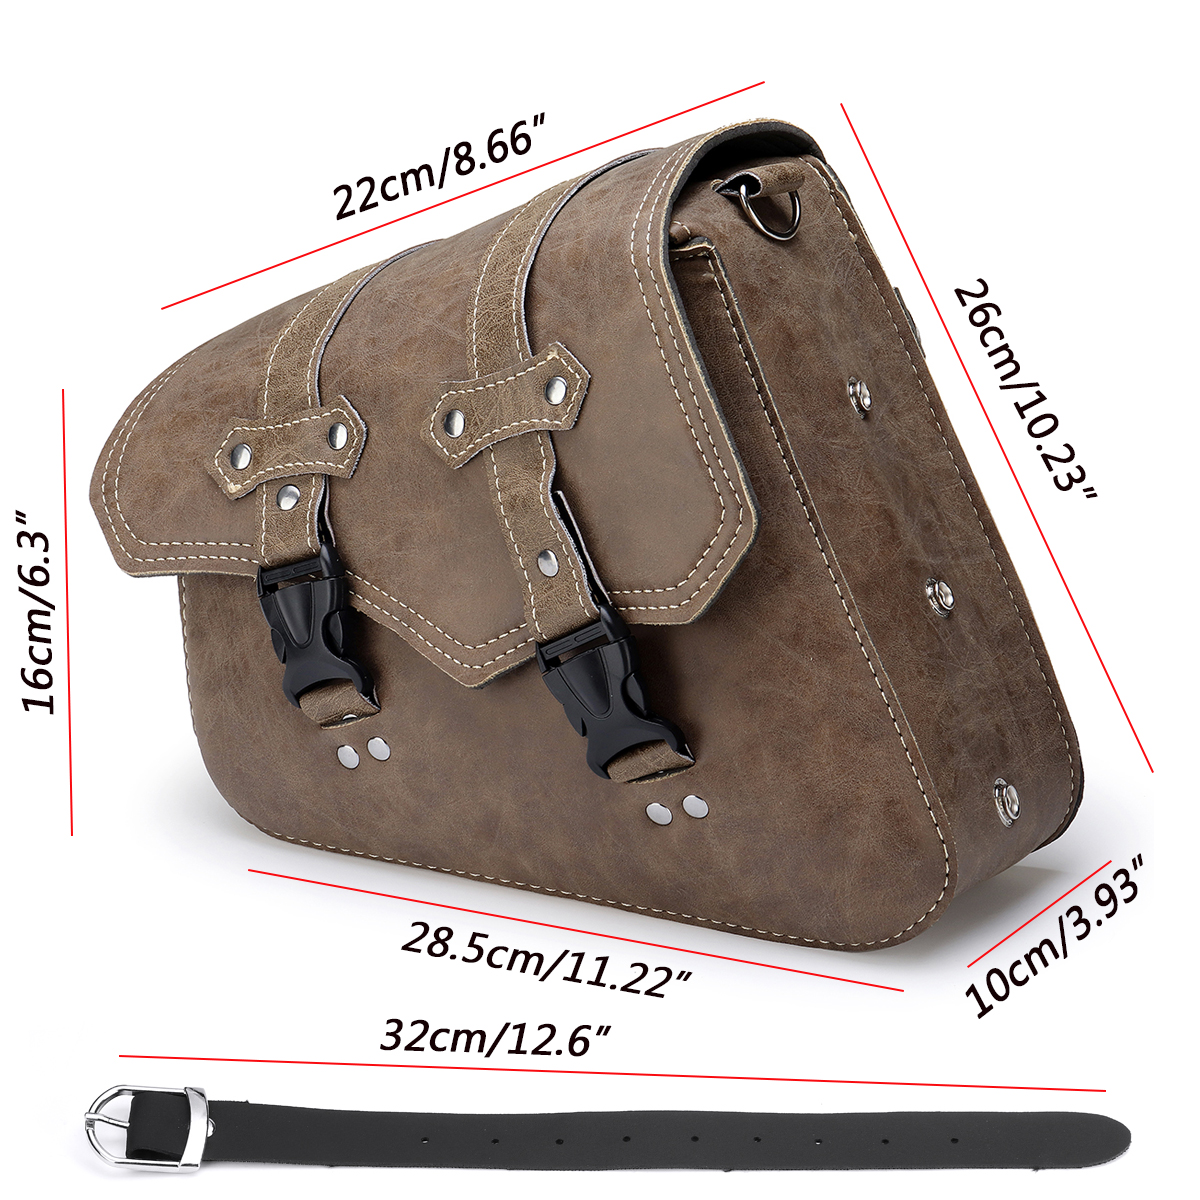 Left-Right-Side-Universal-Motorcycle-Saddlebag-Tool-Storage-Waterproof-PU-Leather-Panniers-Bag-with--1863605-12